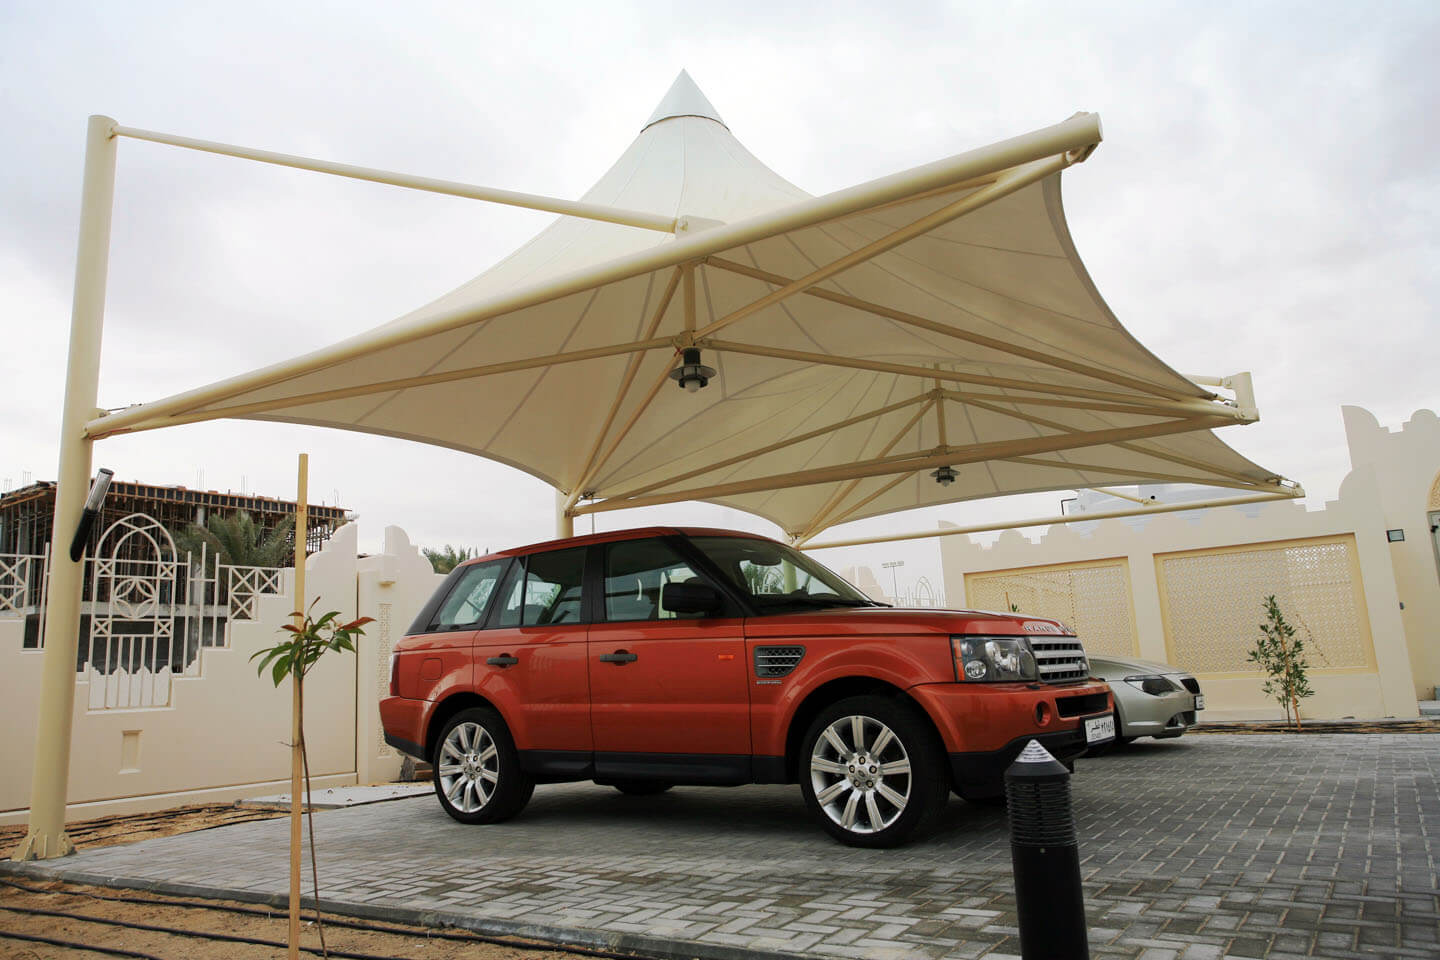 Aluminum Car Parking Shades: Combining Functionality and Style in Dubai